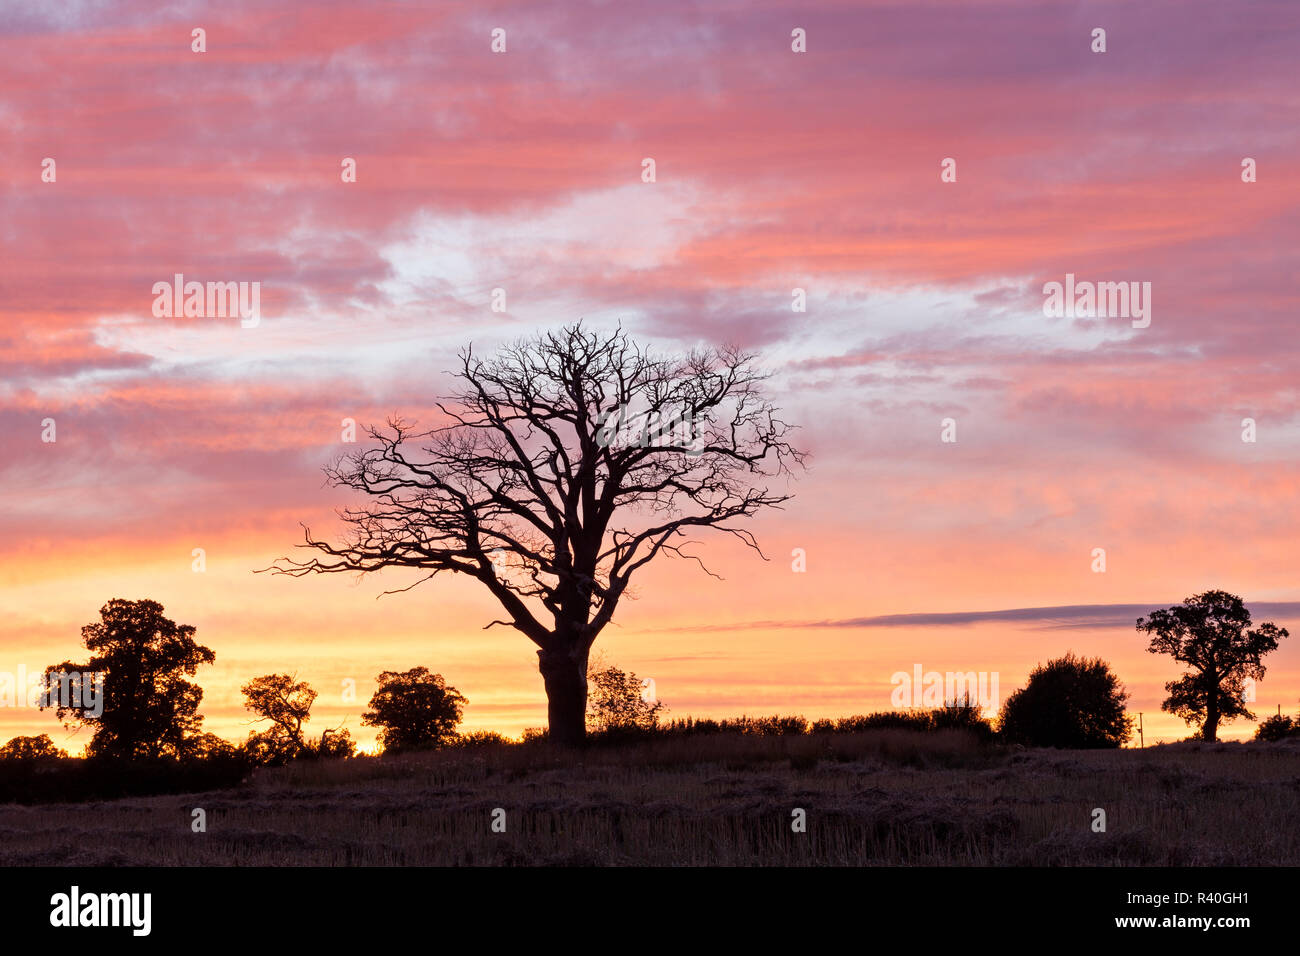 Trees silhouetted against a dramatic sunset sky Stock Photo